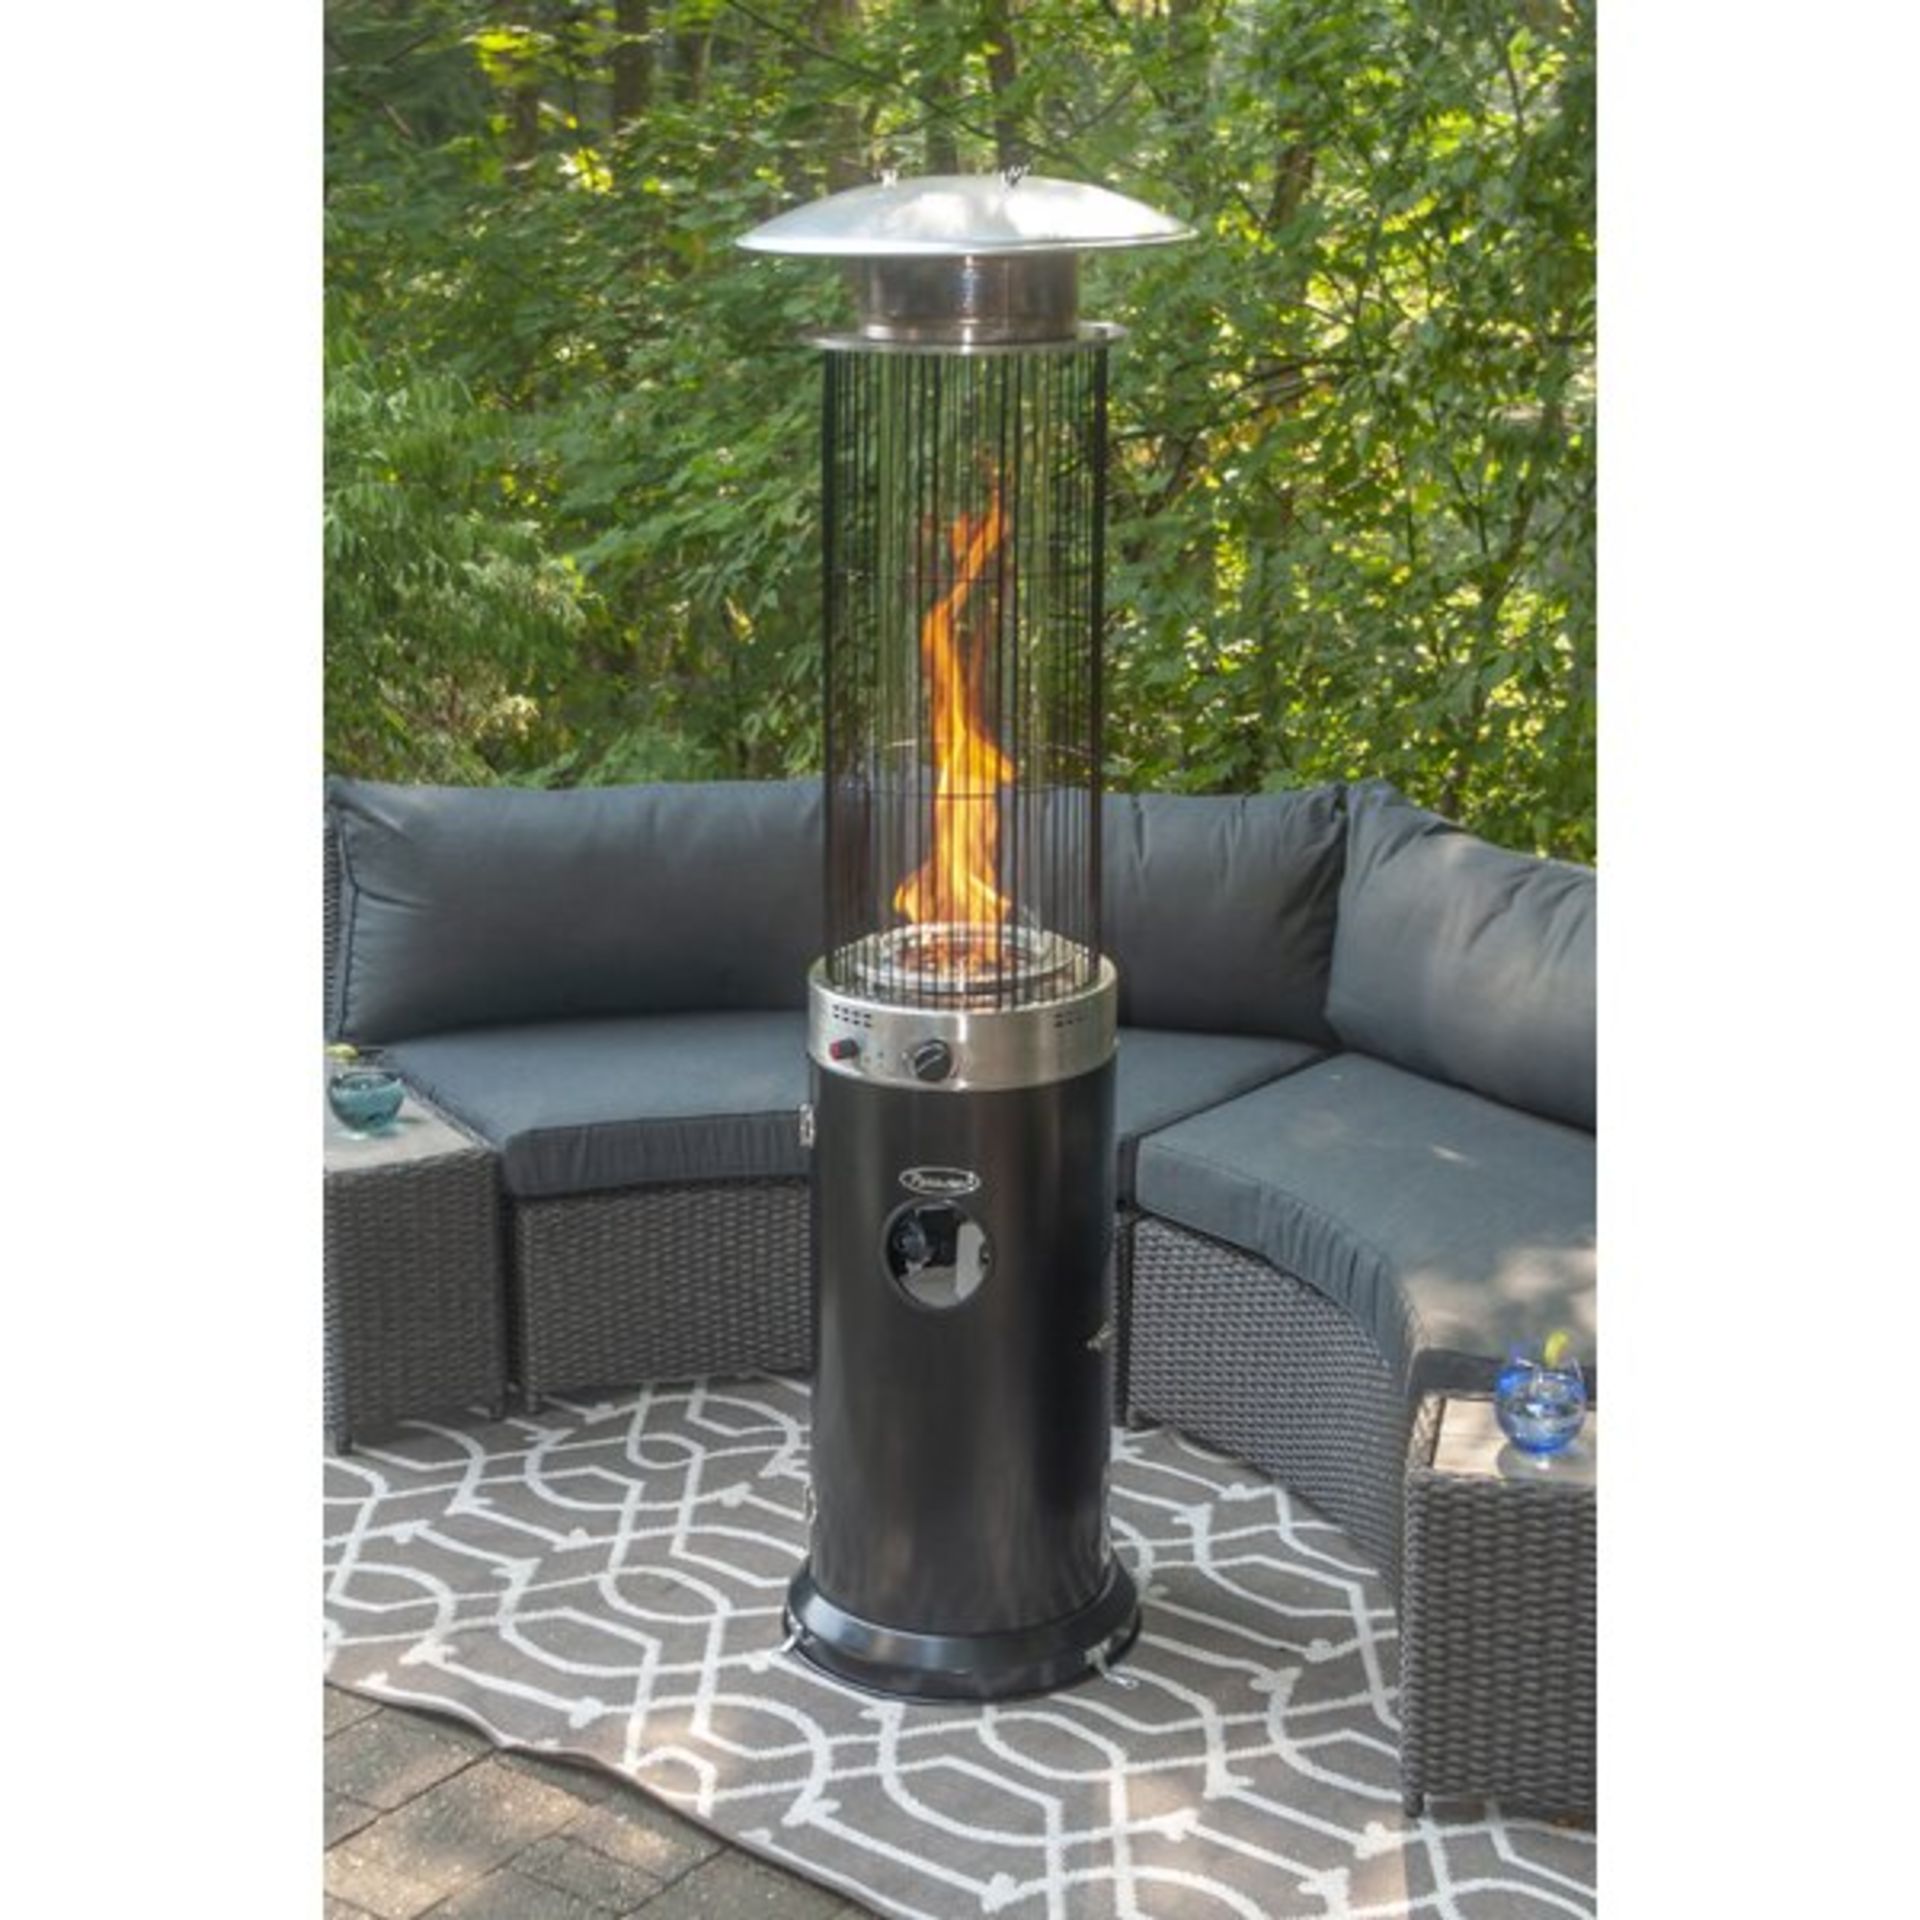 + VAT Brand New Chelsea Garden Company Wheeled Garden Gas Patio Heater - 2.11m Tall - 12.5kw - With